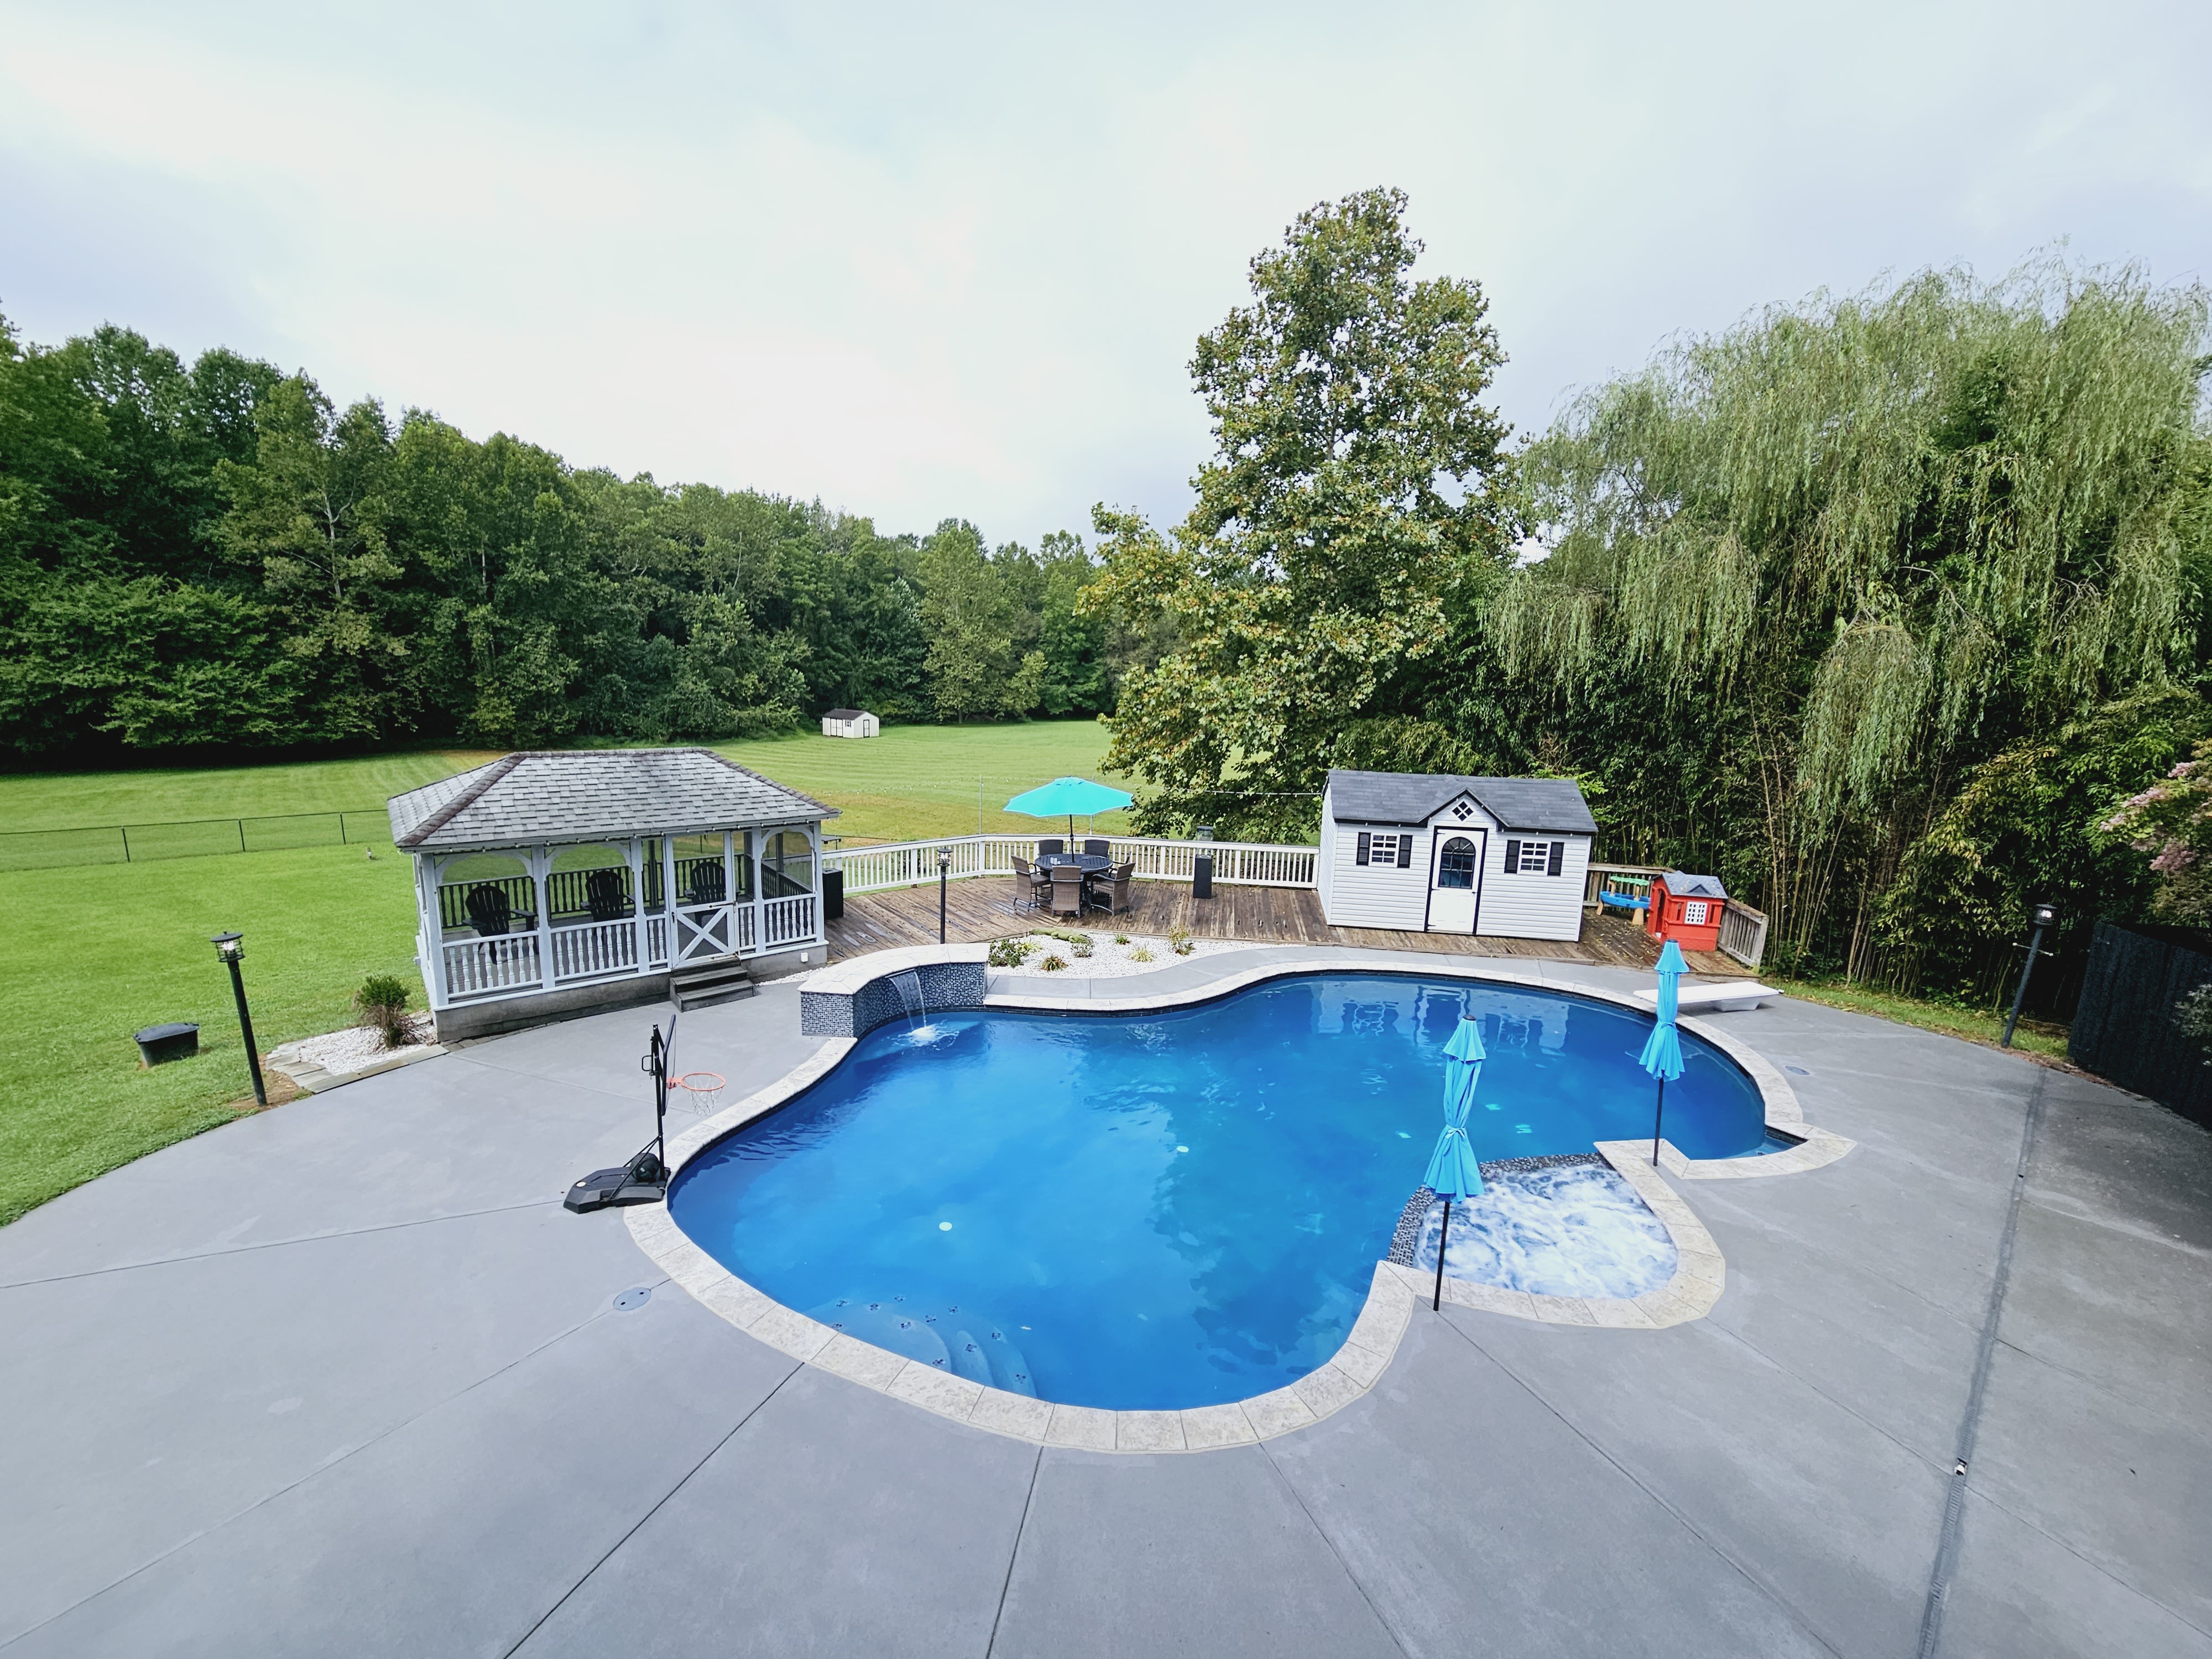 The property has a and the cement around the pool and front walkway has been textured and colored to add appeal and anti-slip protection. 